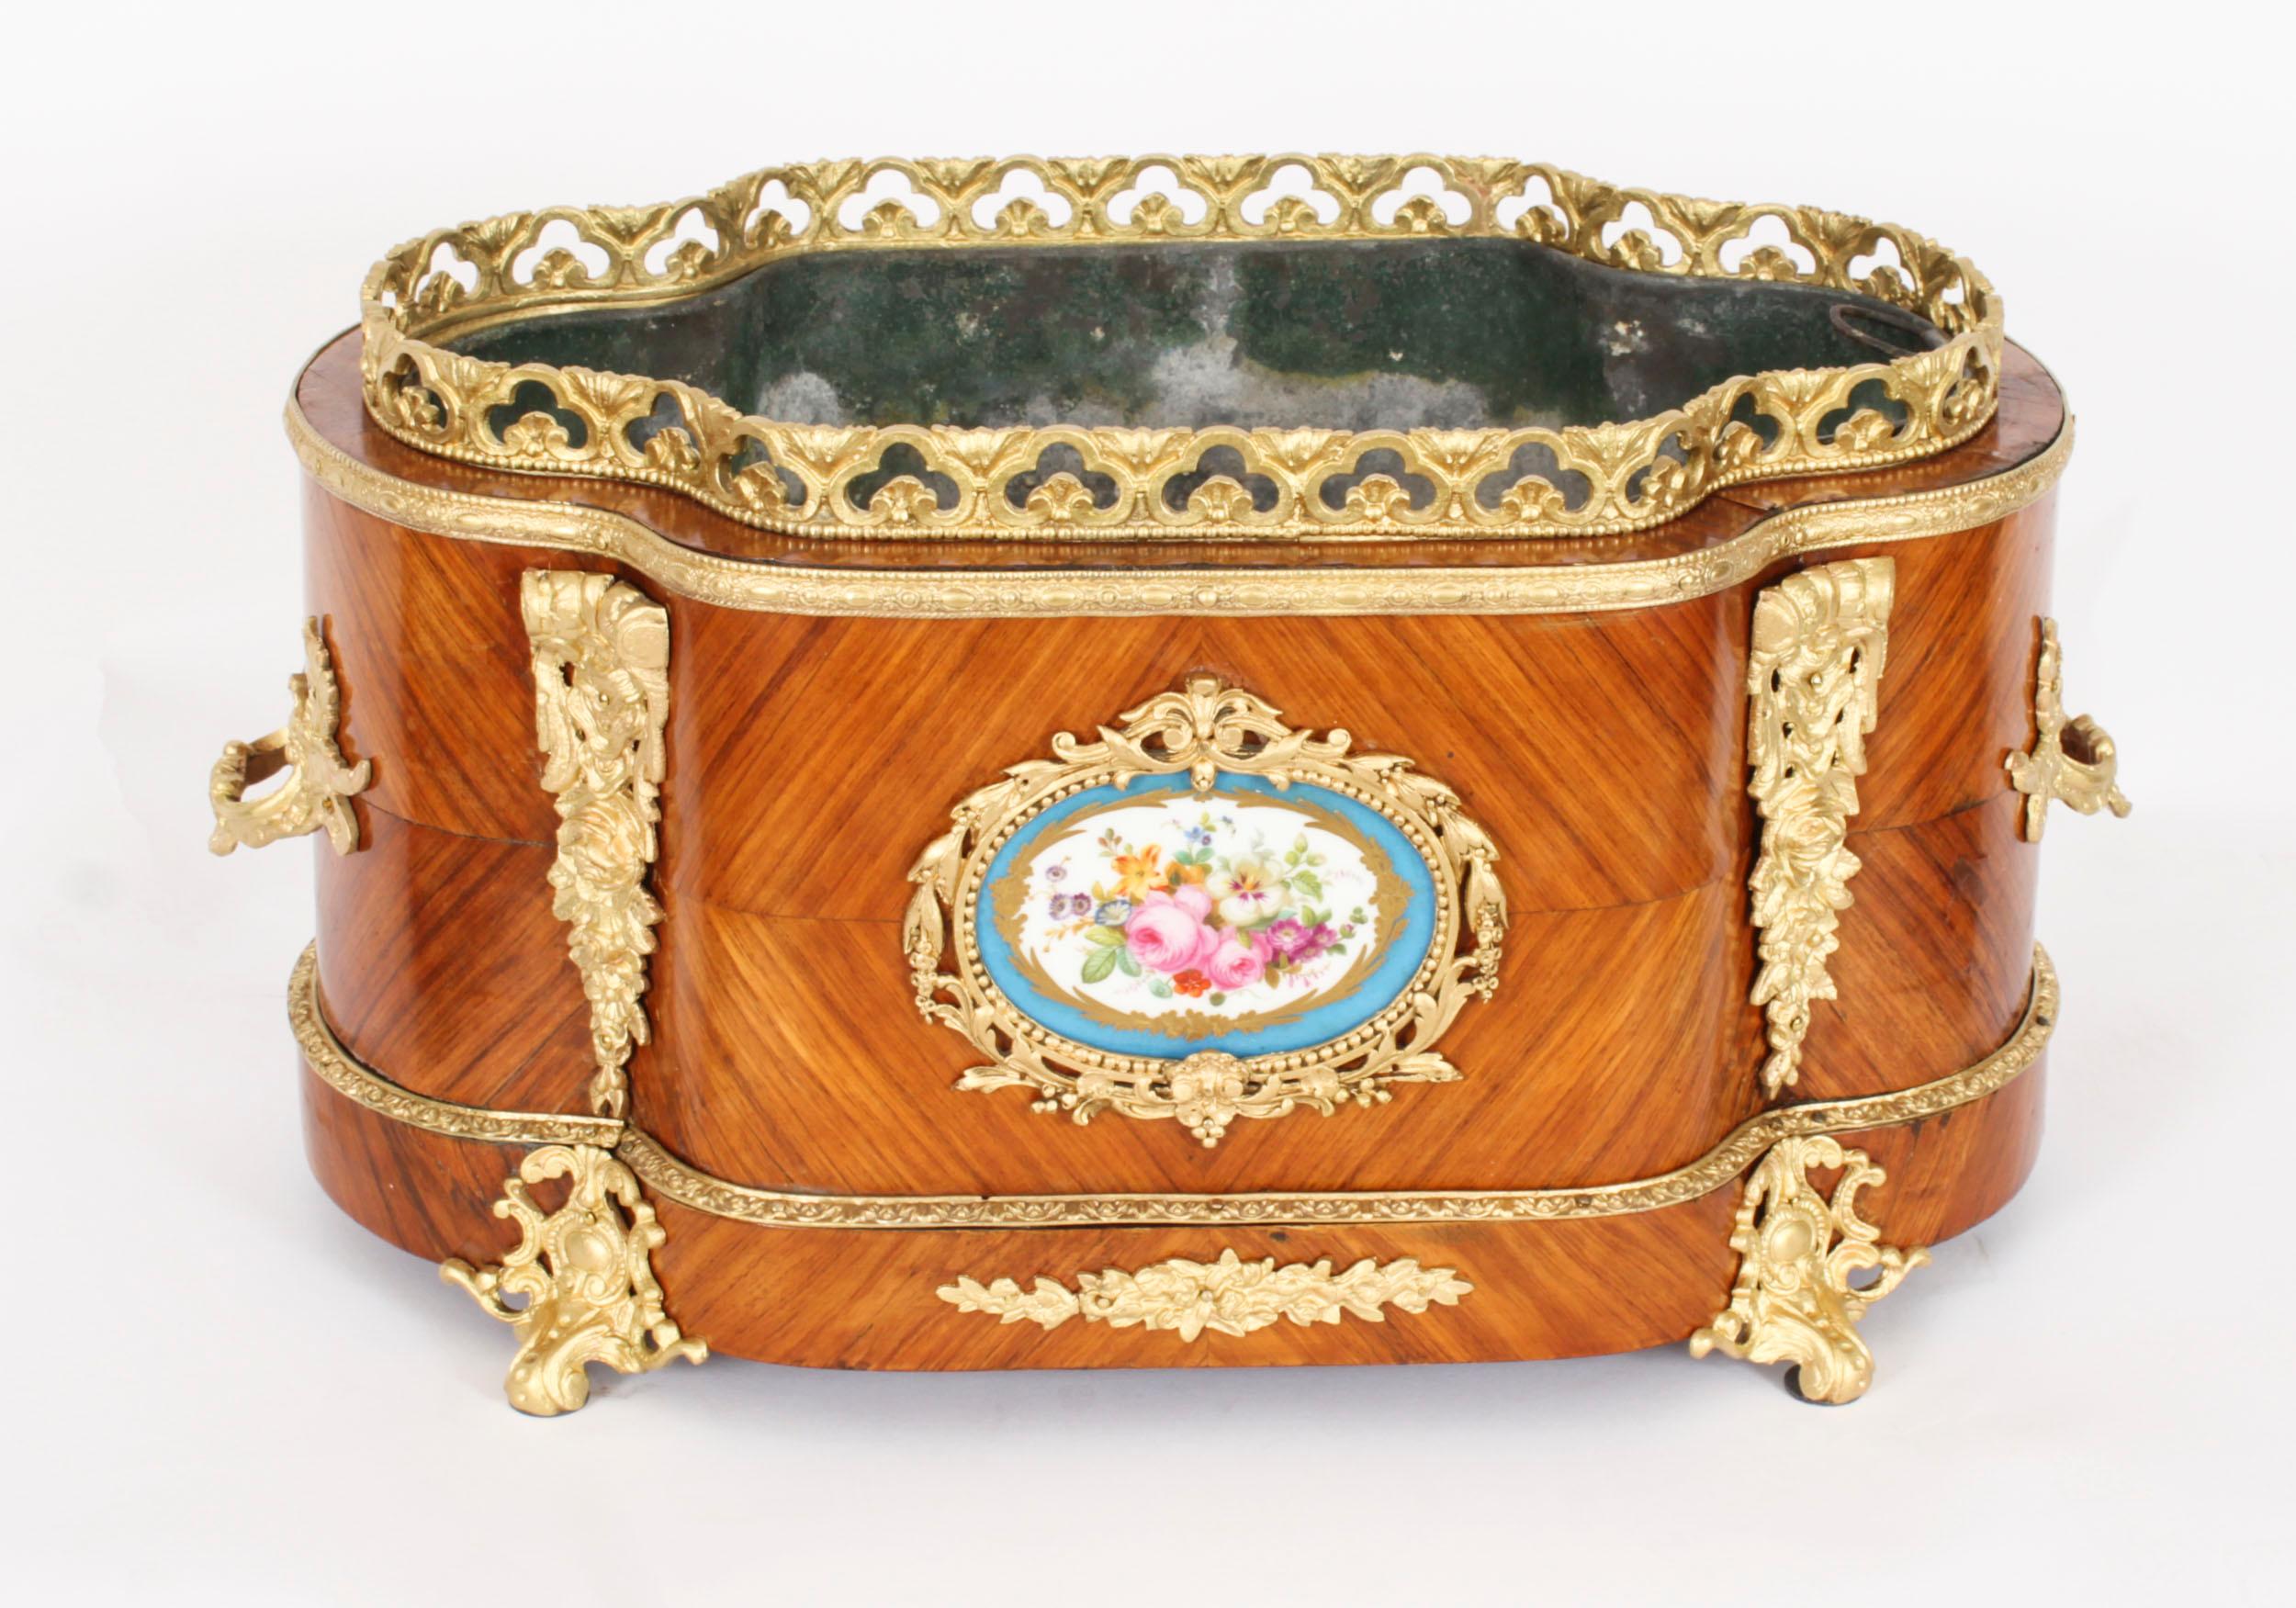 Antique French Sevres Porcelain Ormolu Mounted Planter Jardiniere 19th Century For Sale 4